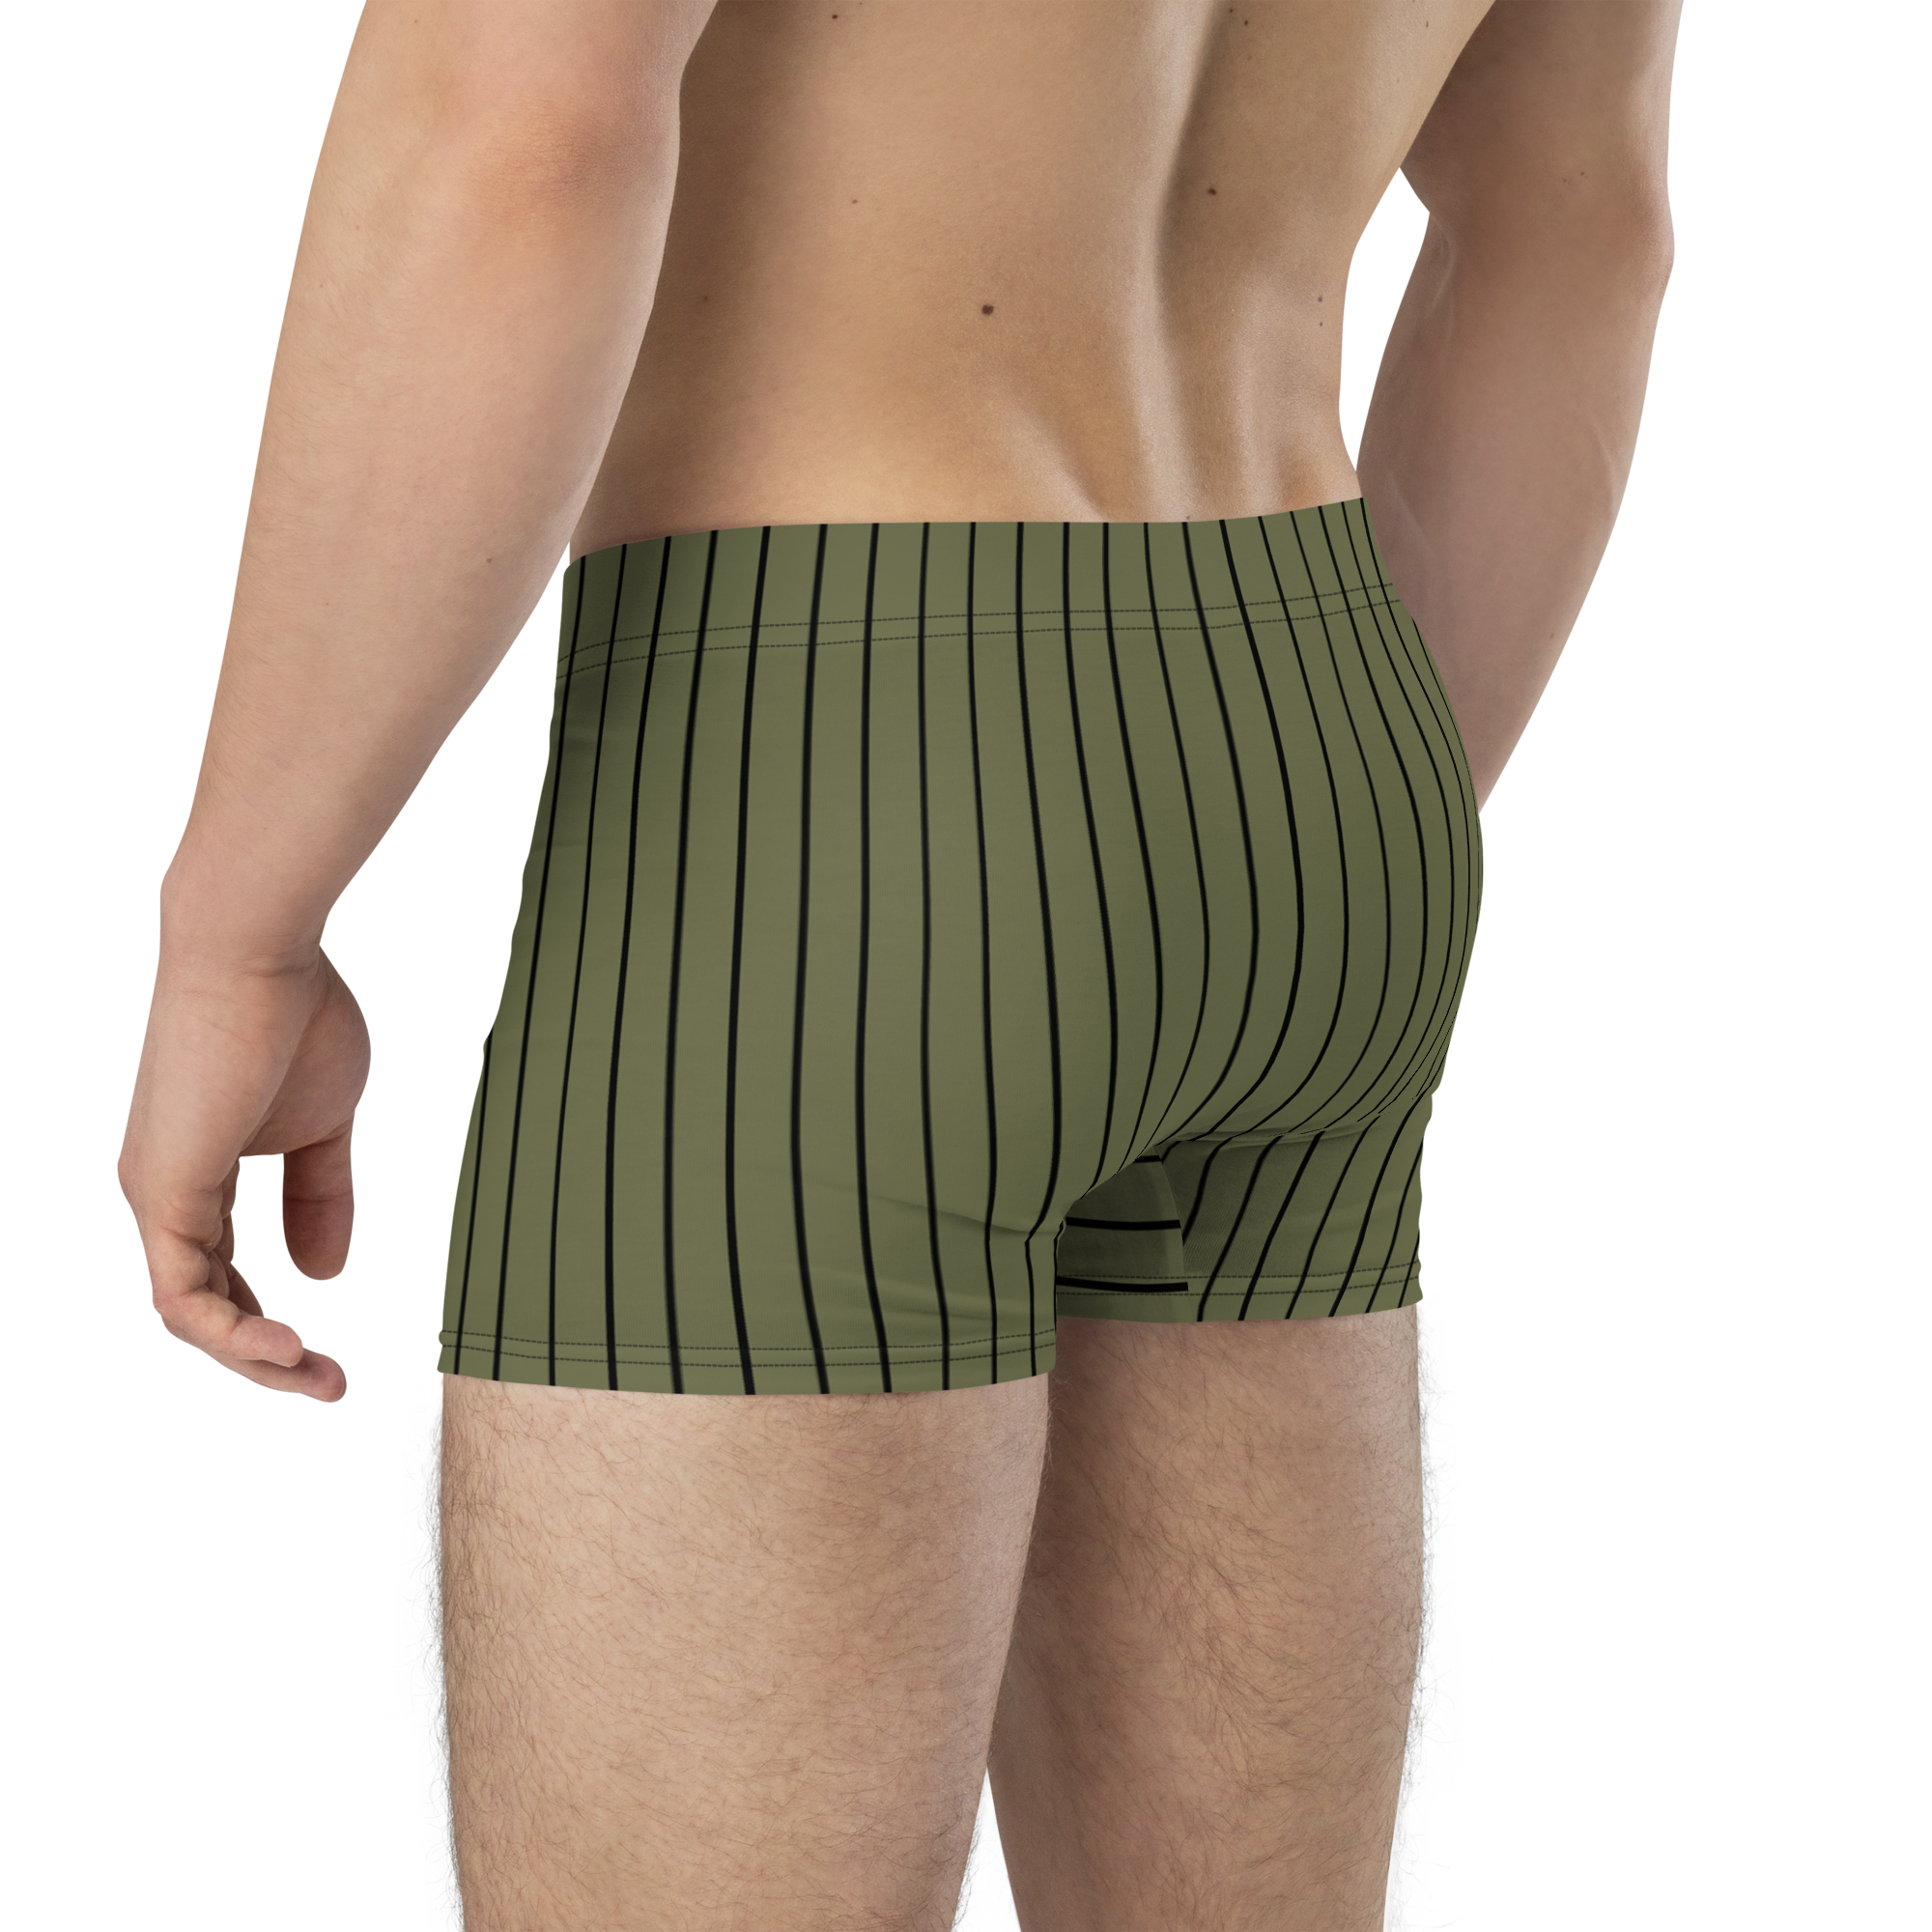 ROYAL Team Iconic. Athletix Boi Briefs Pinstripe Martini Olive and Blk